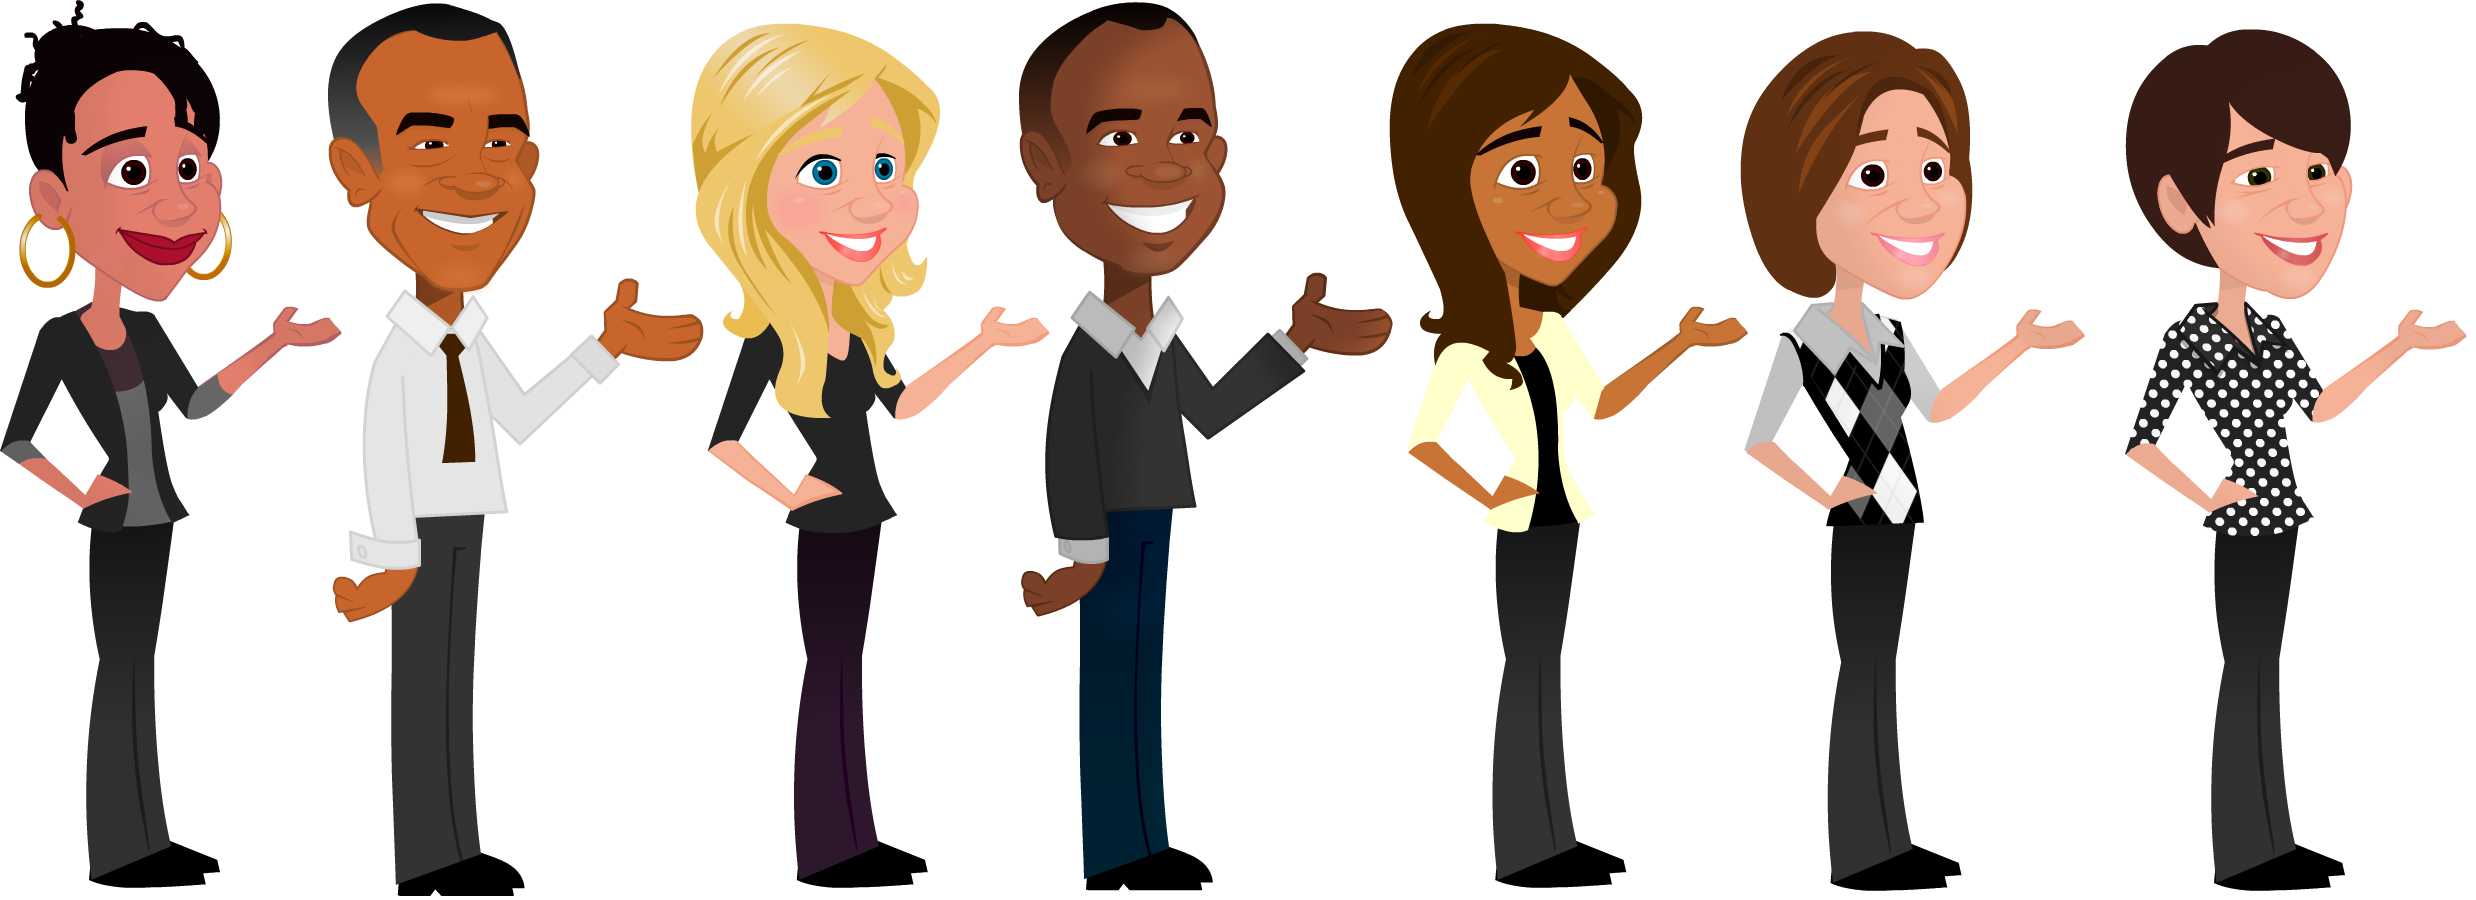 Free Cliparts Diversity People, Download Free Clip Art, Free.